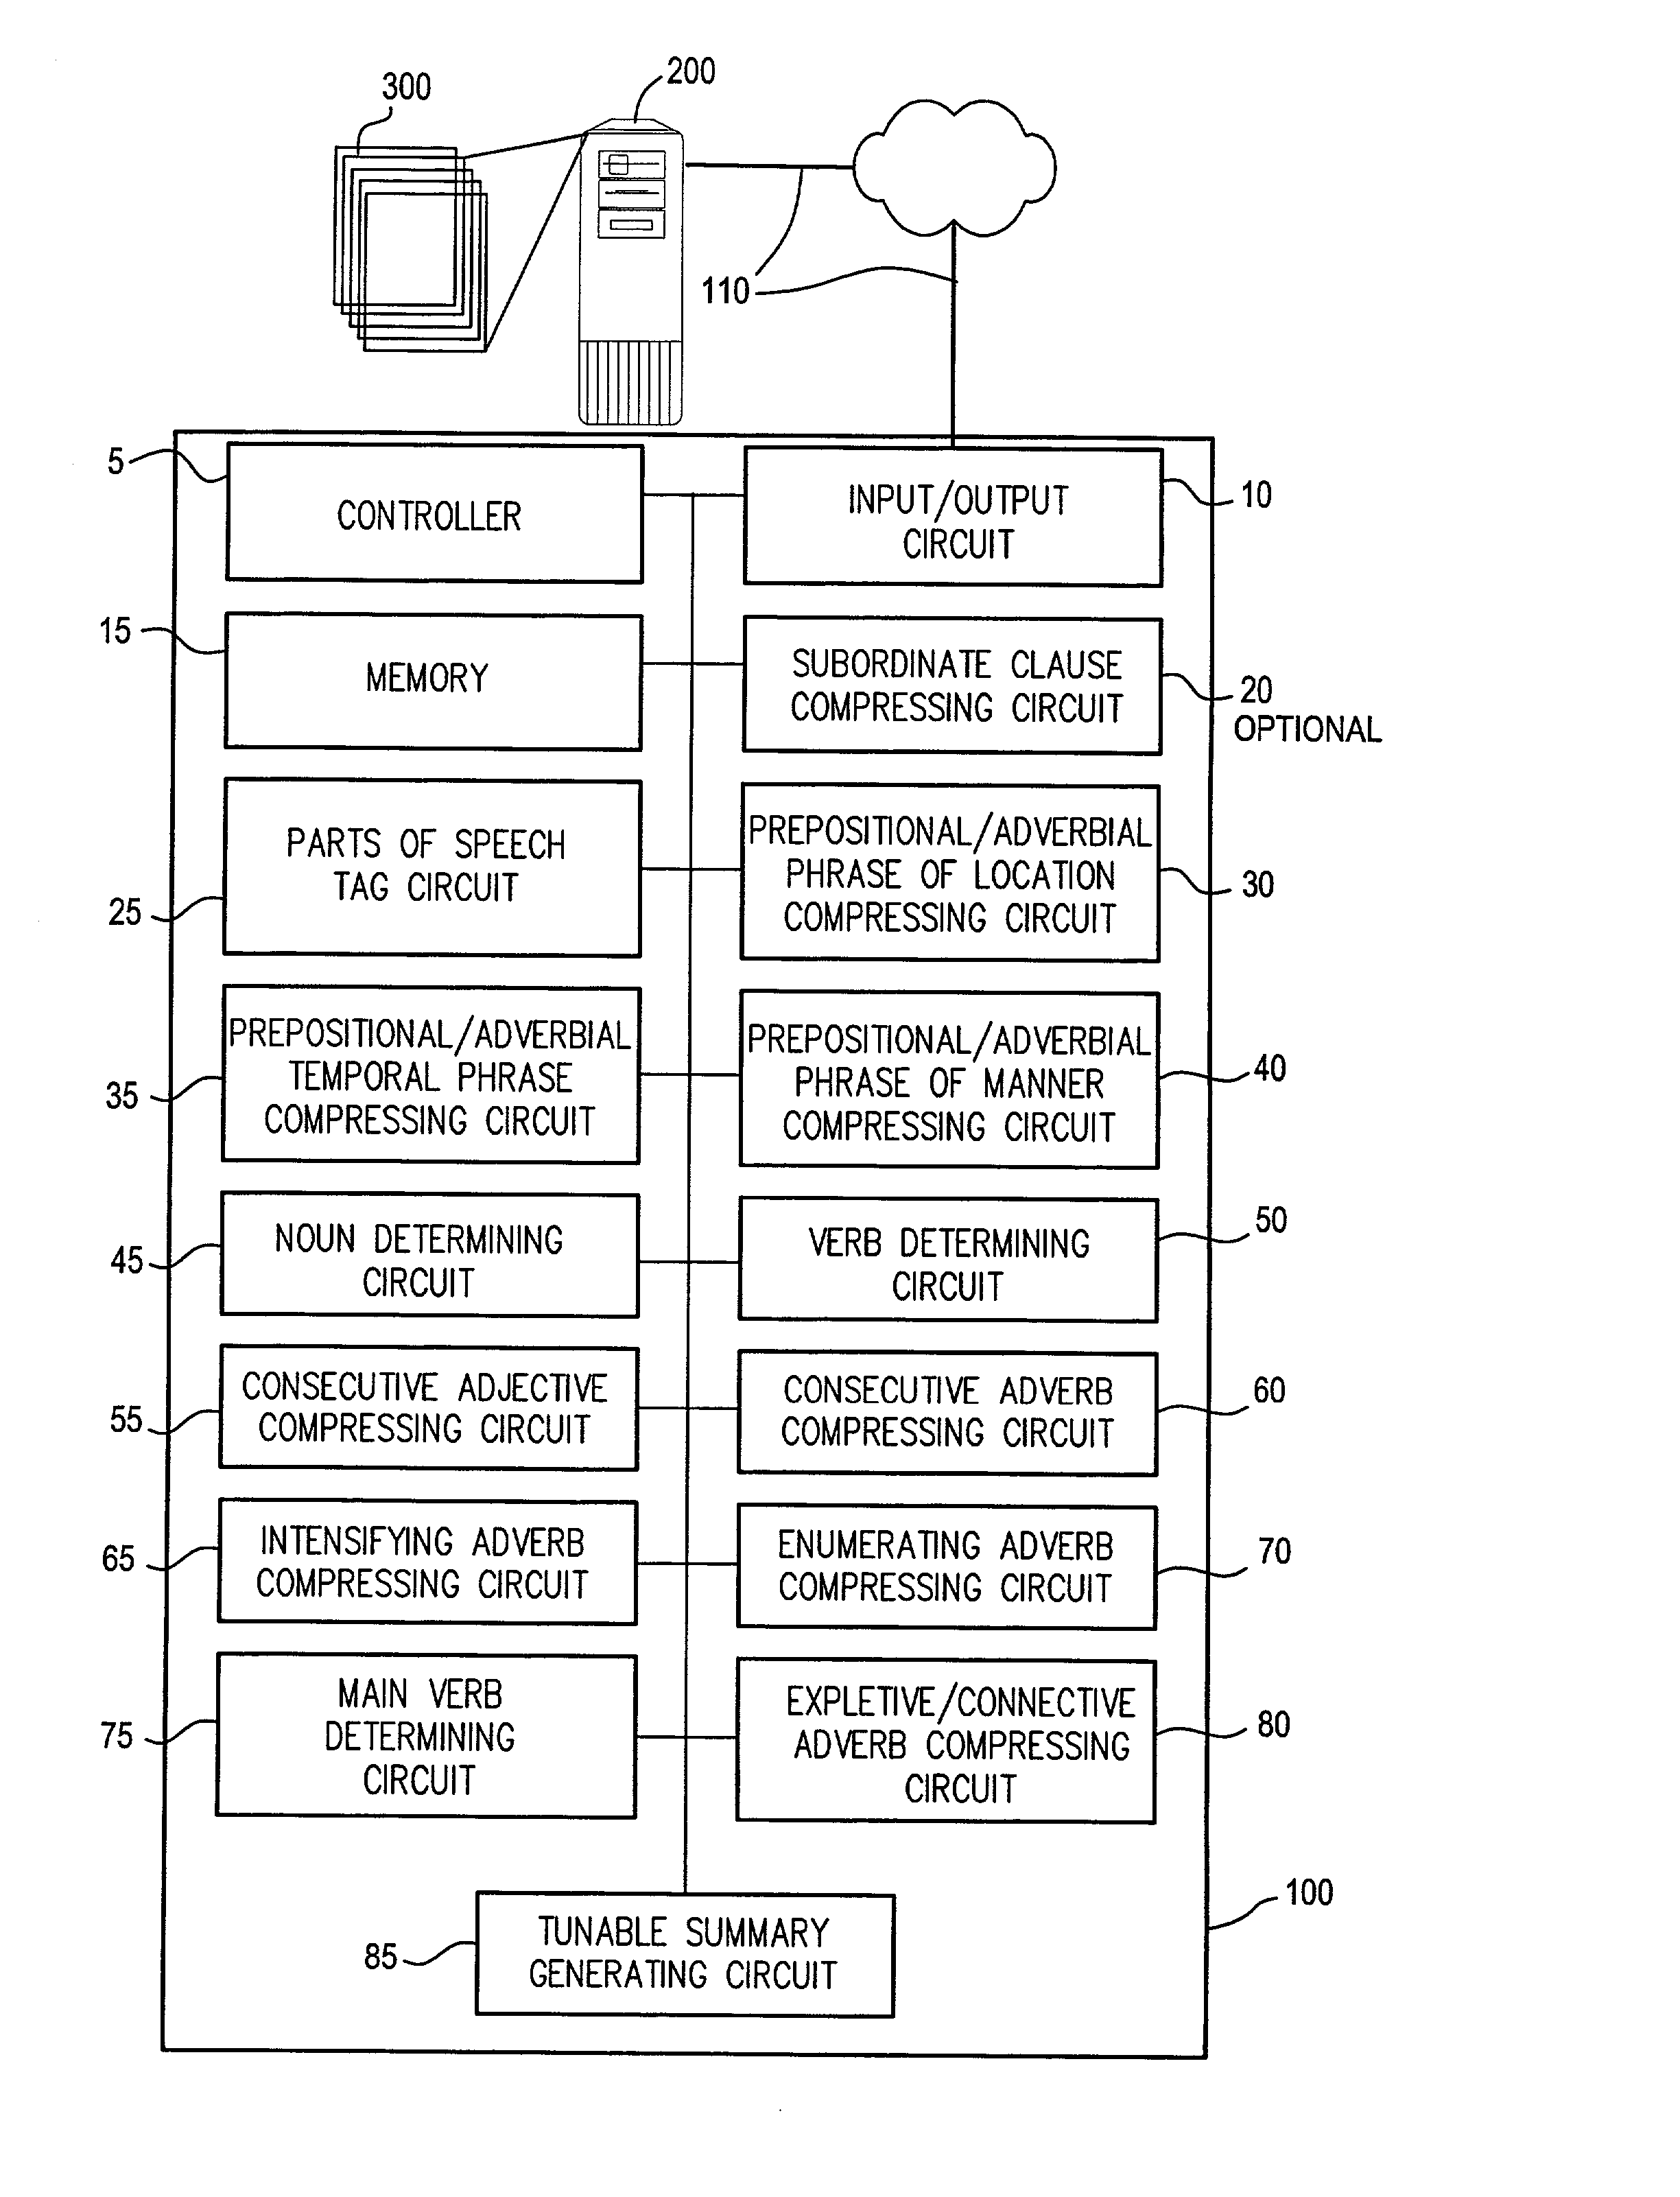 System and method for generating analytic summaries